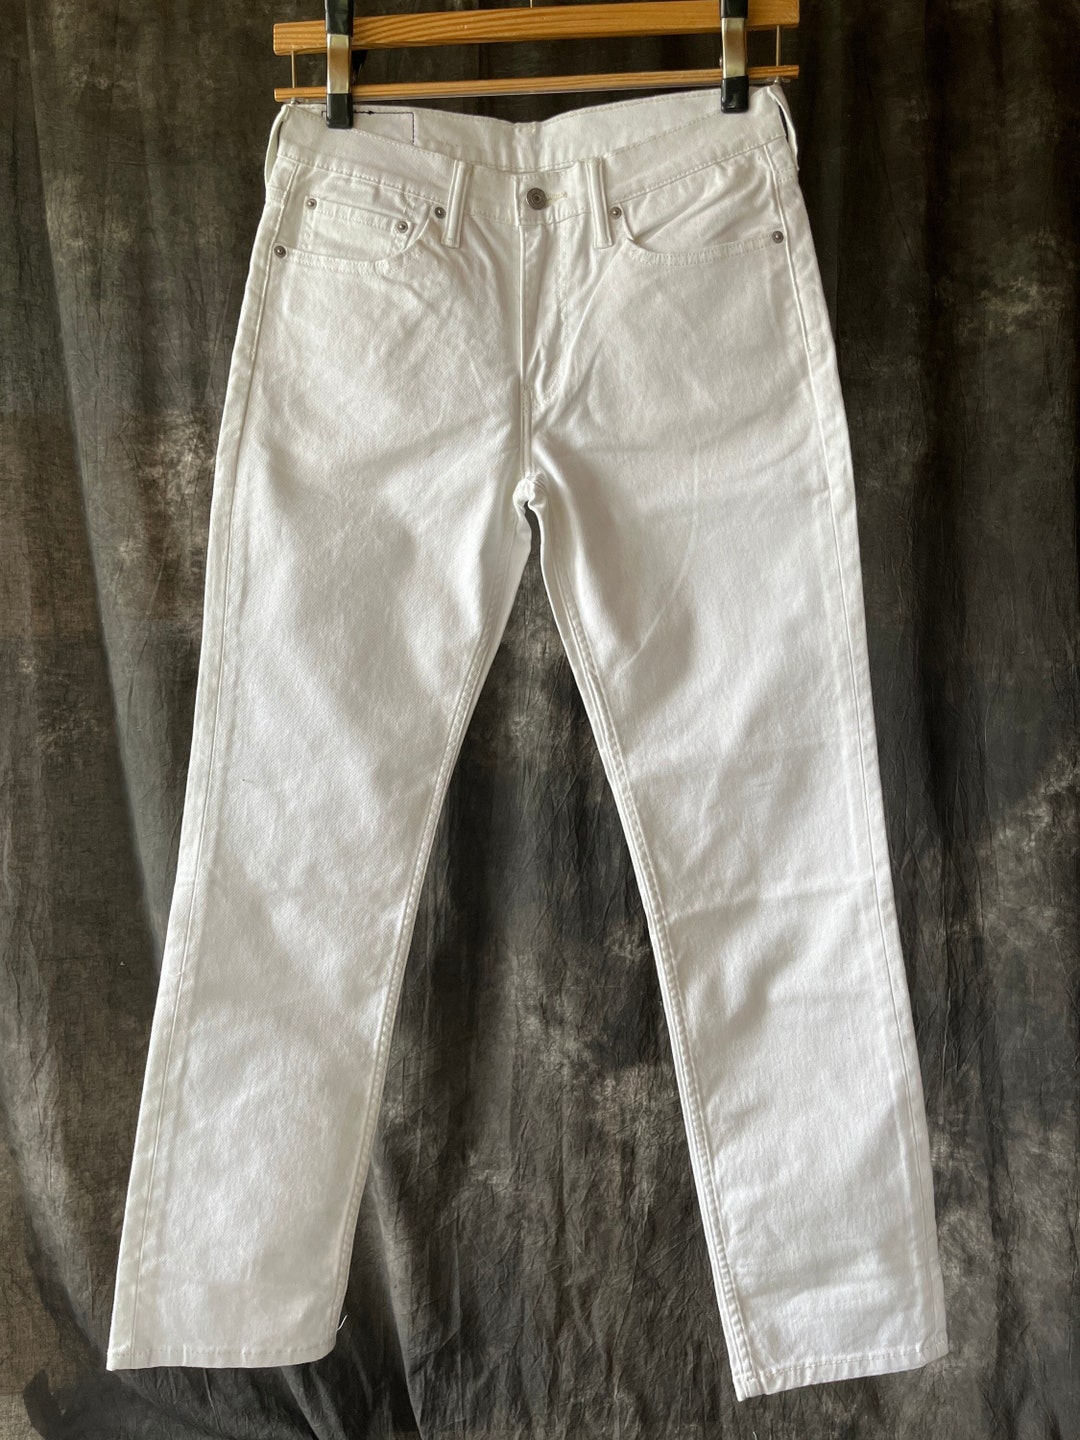 Levis 511 White Jeans 31X30 Labeled - Etsy